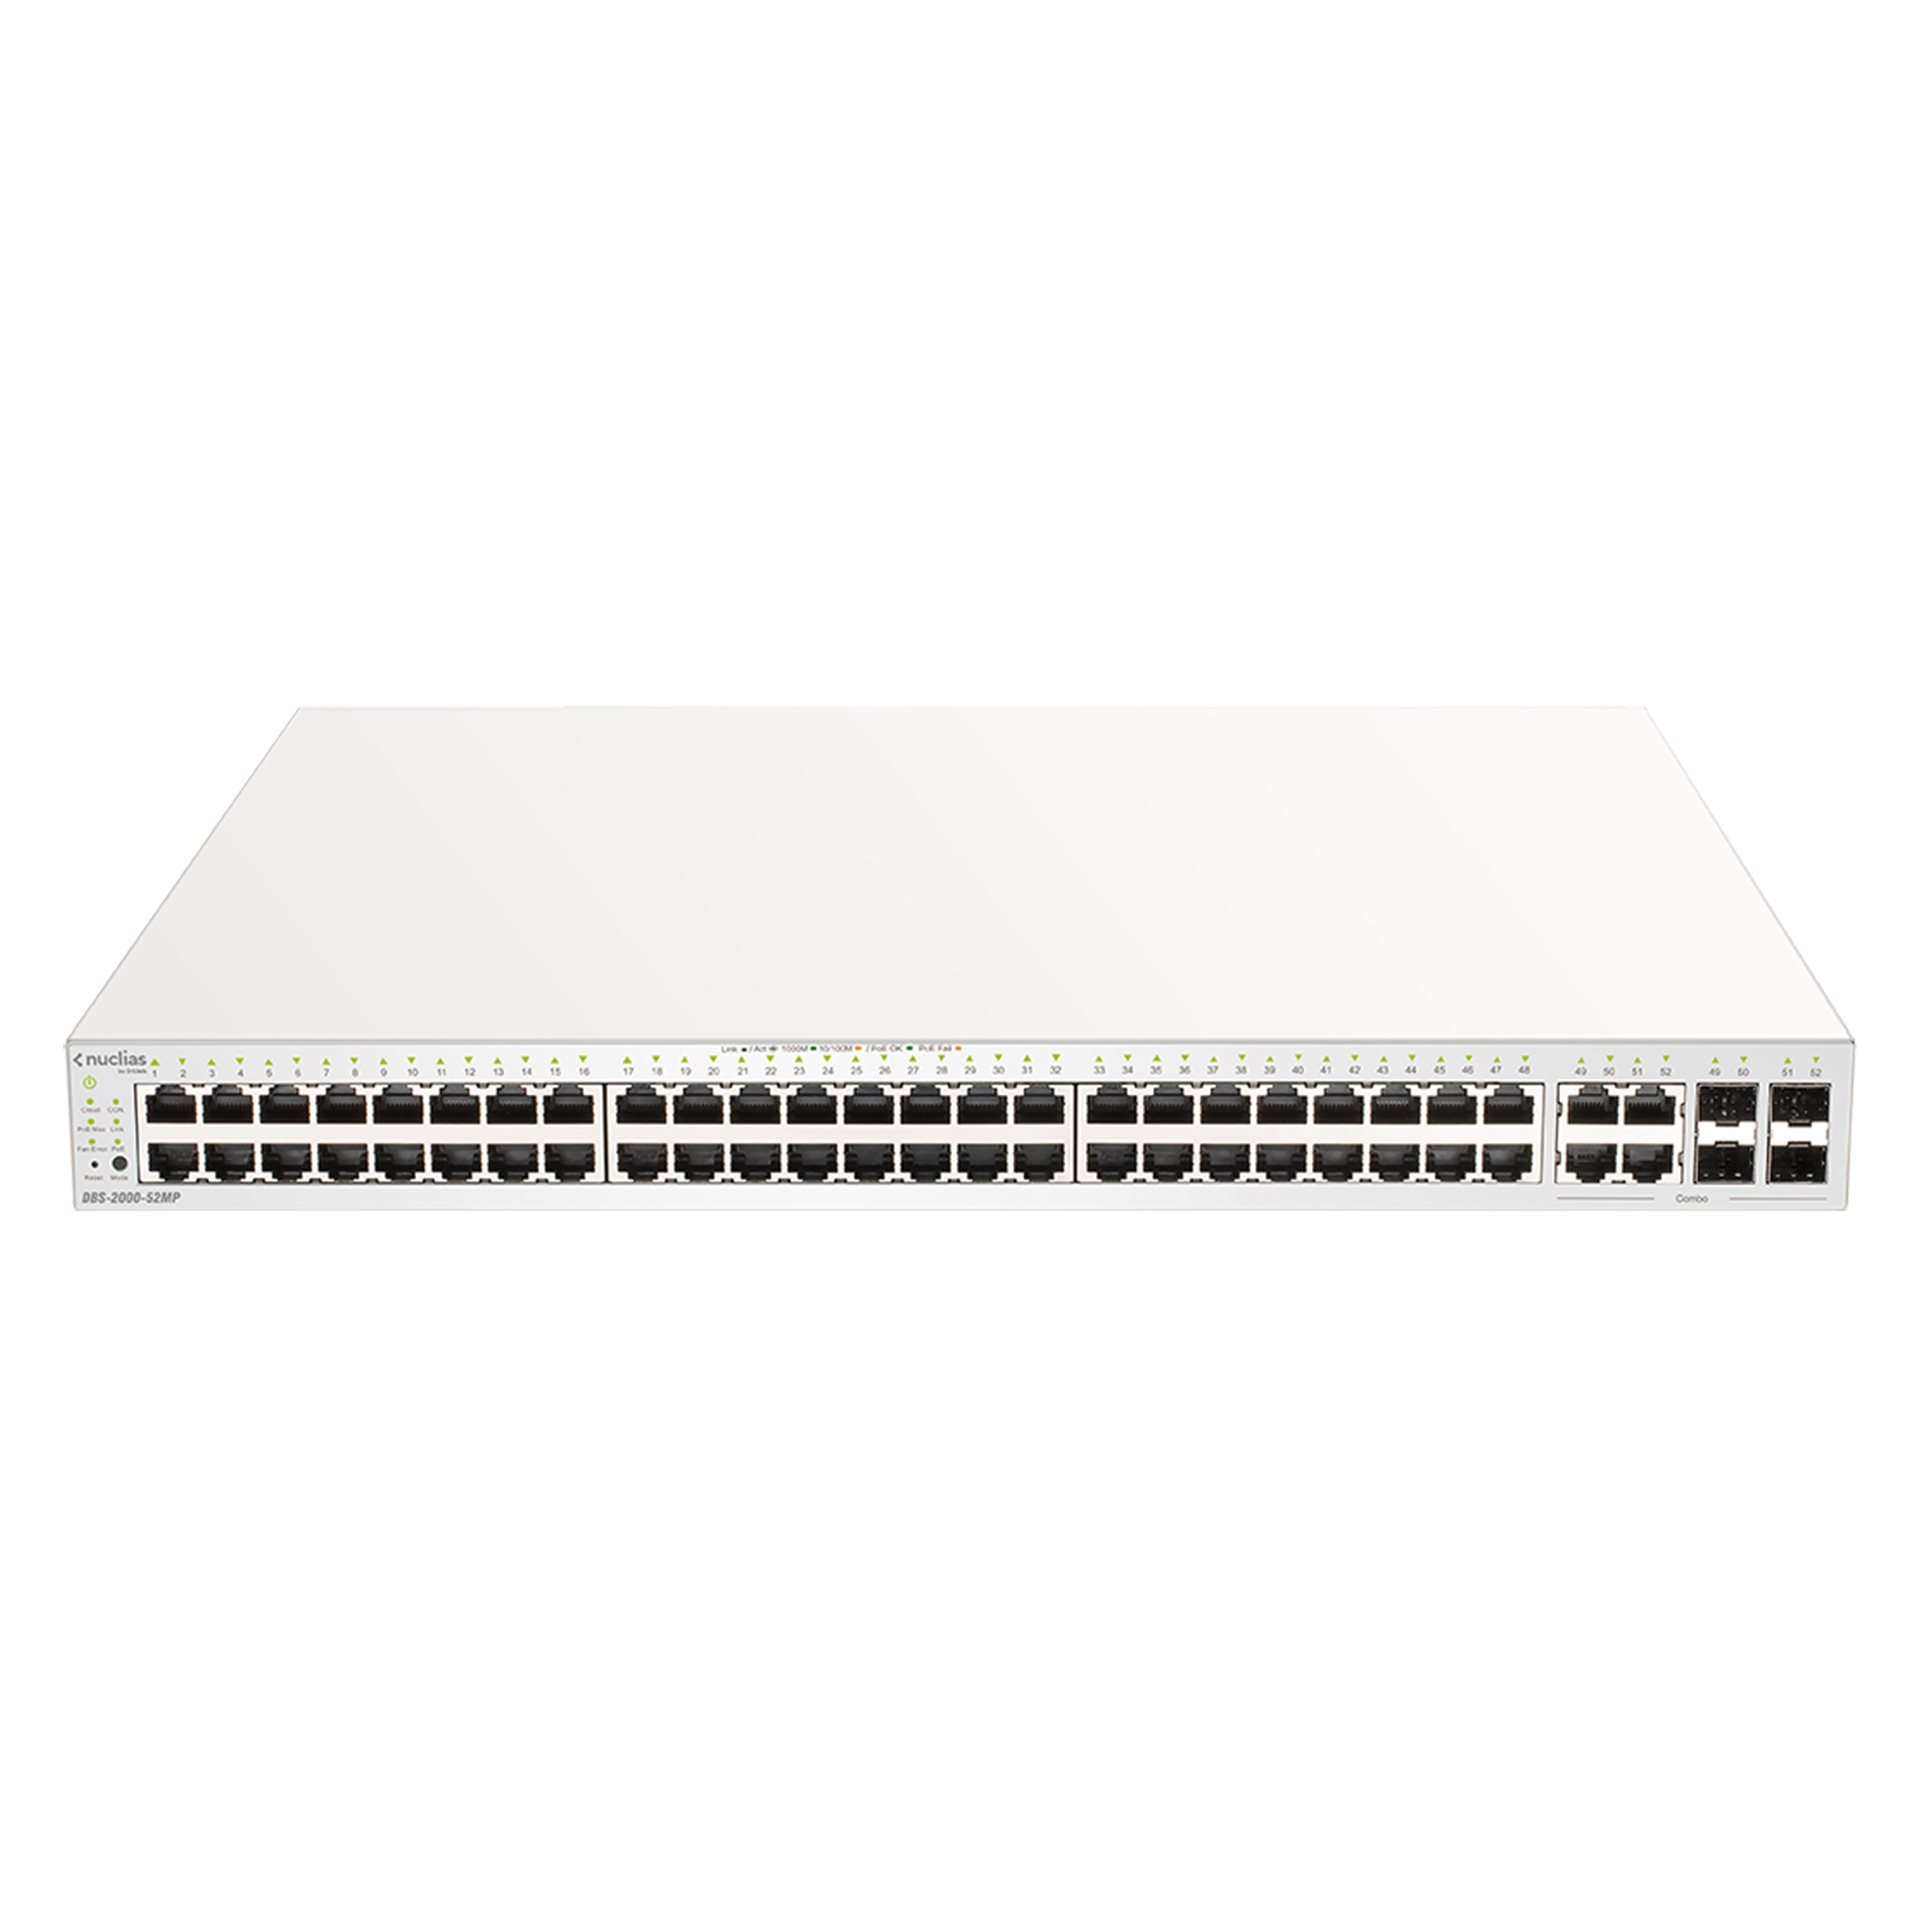   Switch ethernet   Nuclias Switch 48 Giga PoE at 370W + 4 Combo SFP DBS-2000-52MP